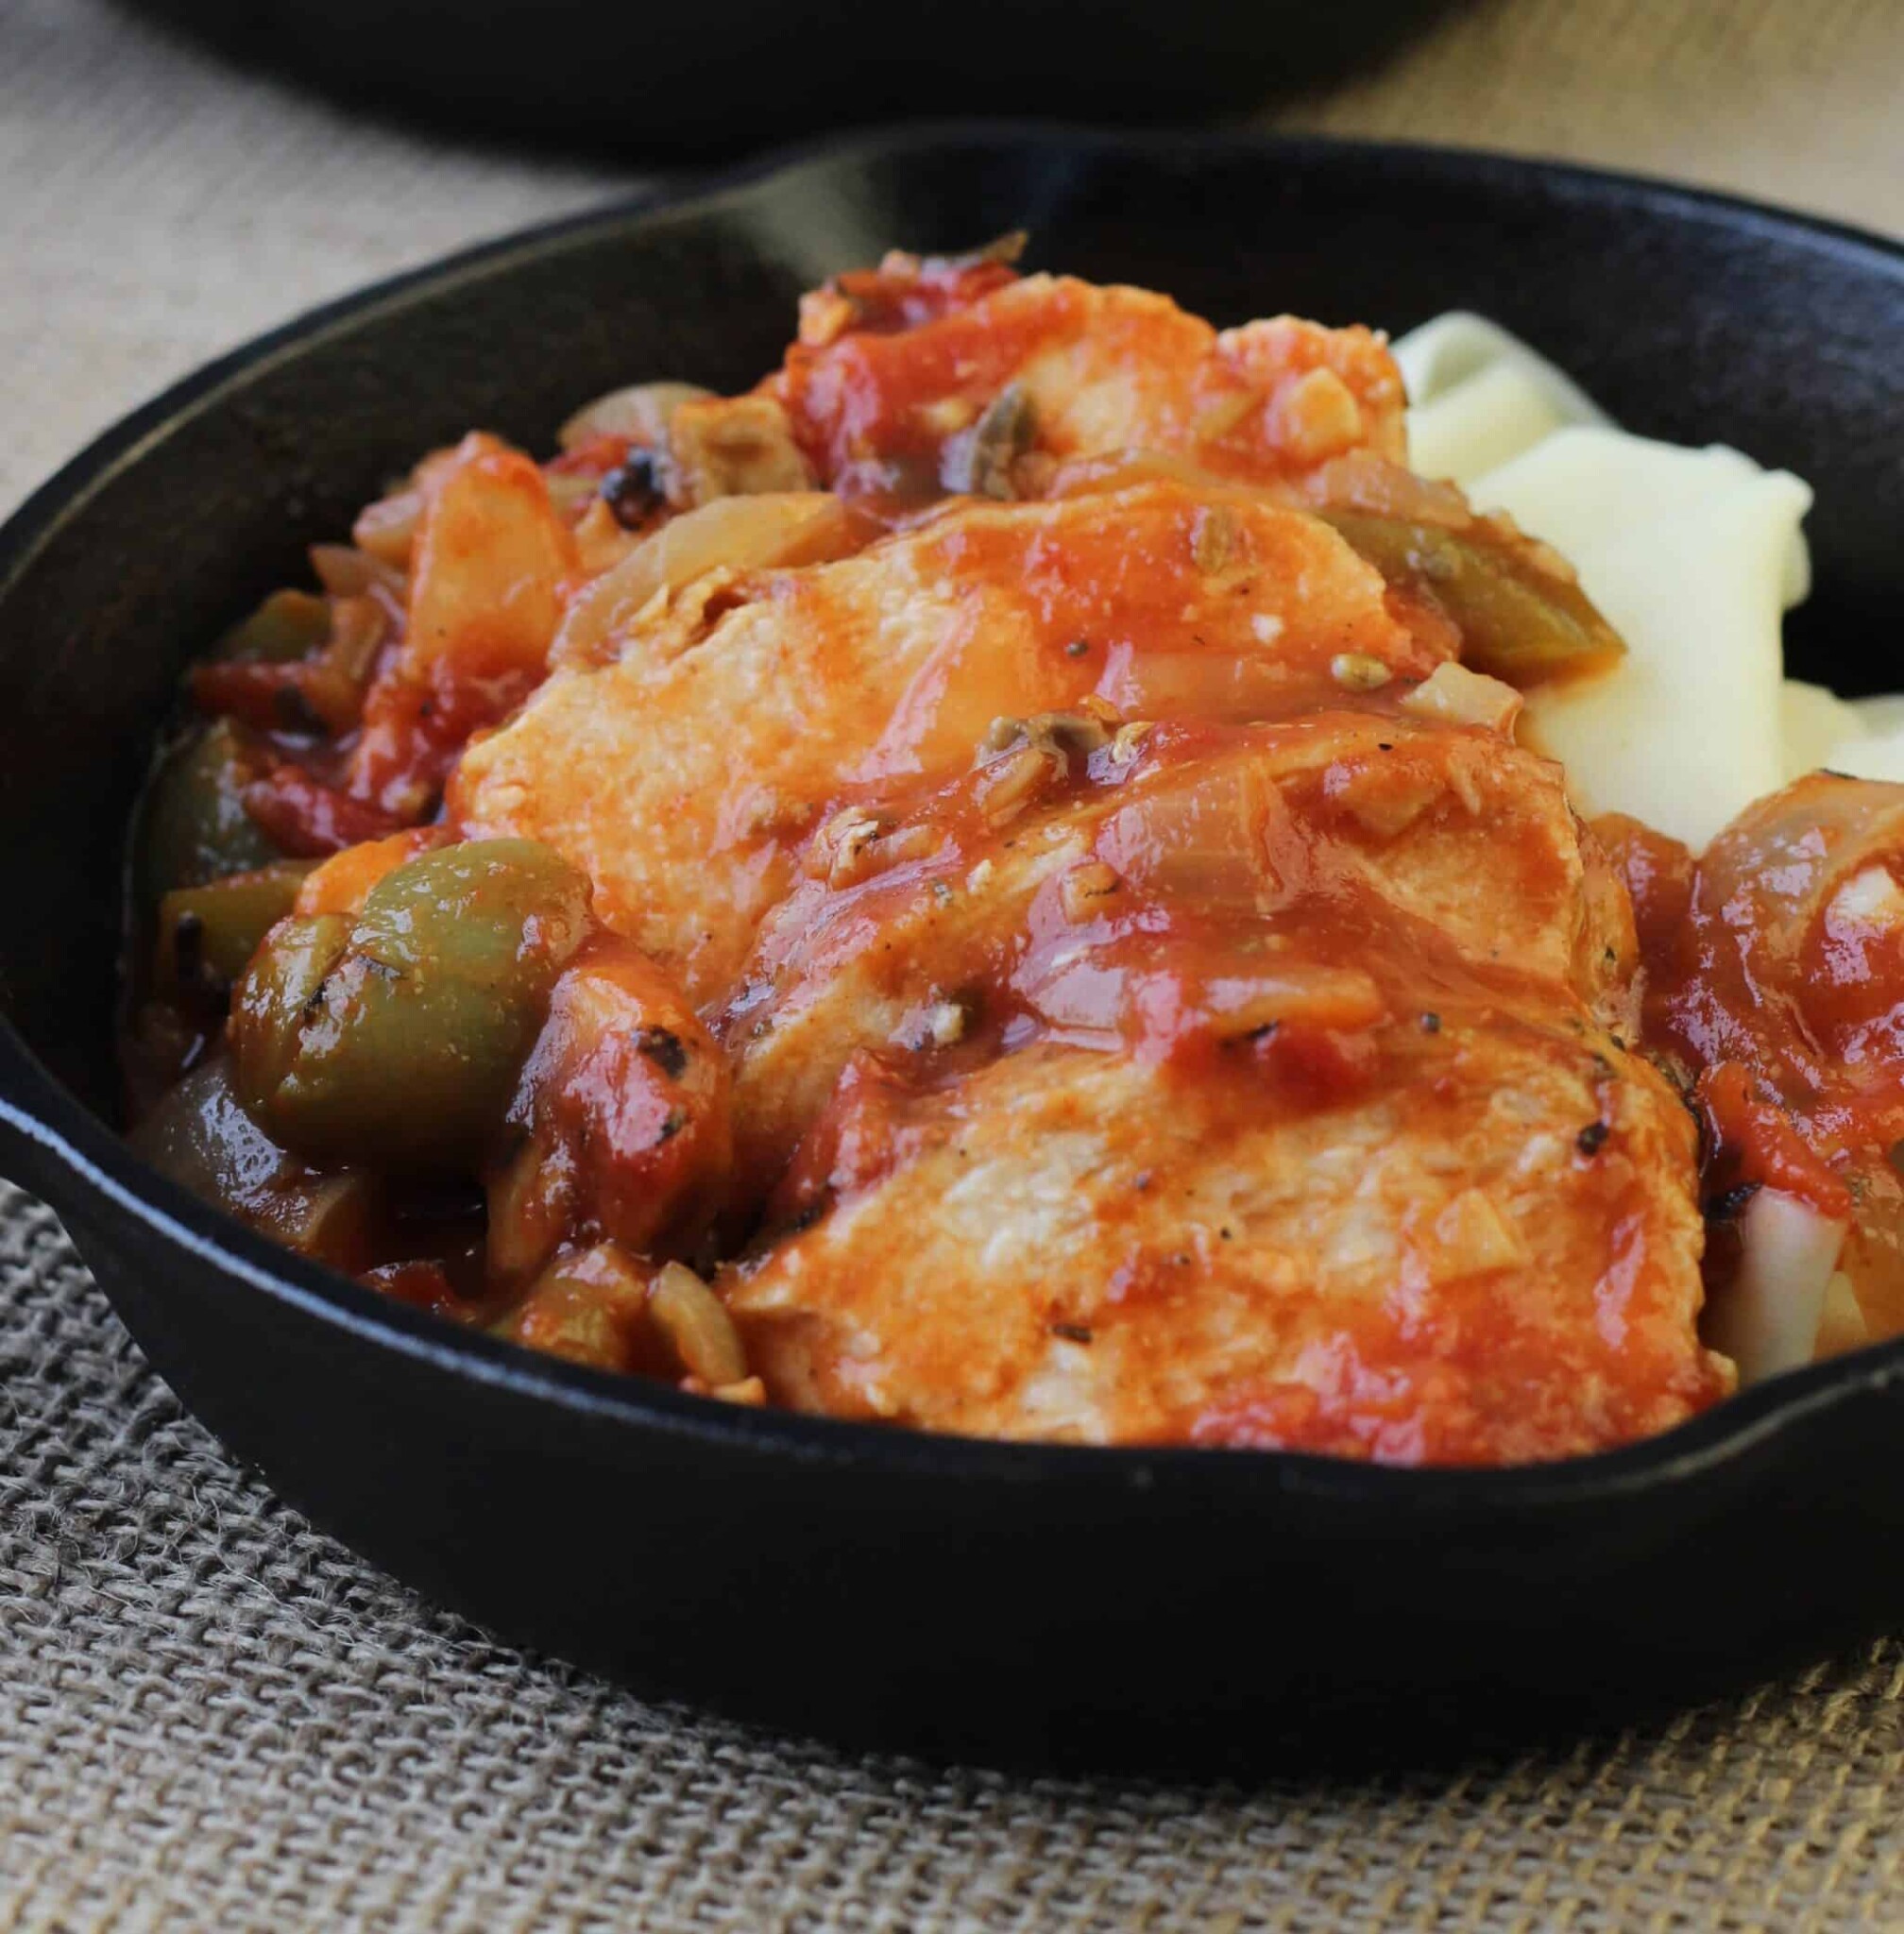 Chicken in red sauce with slices of cheese.